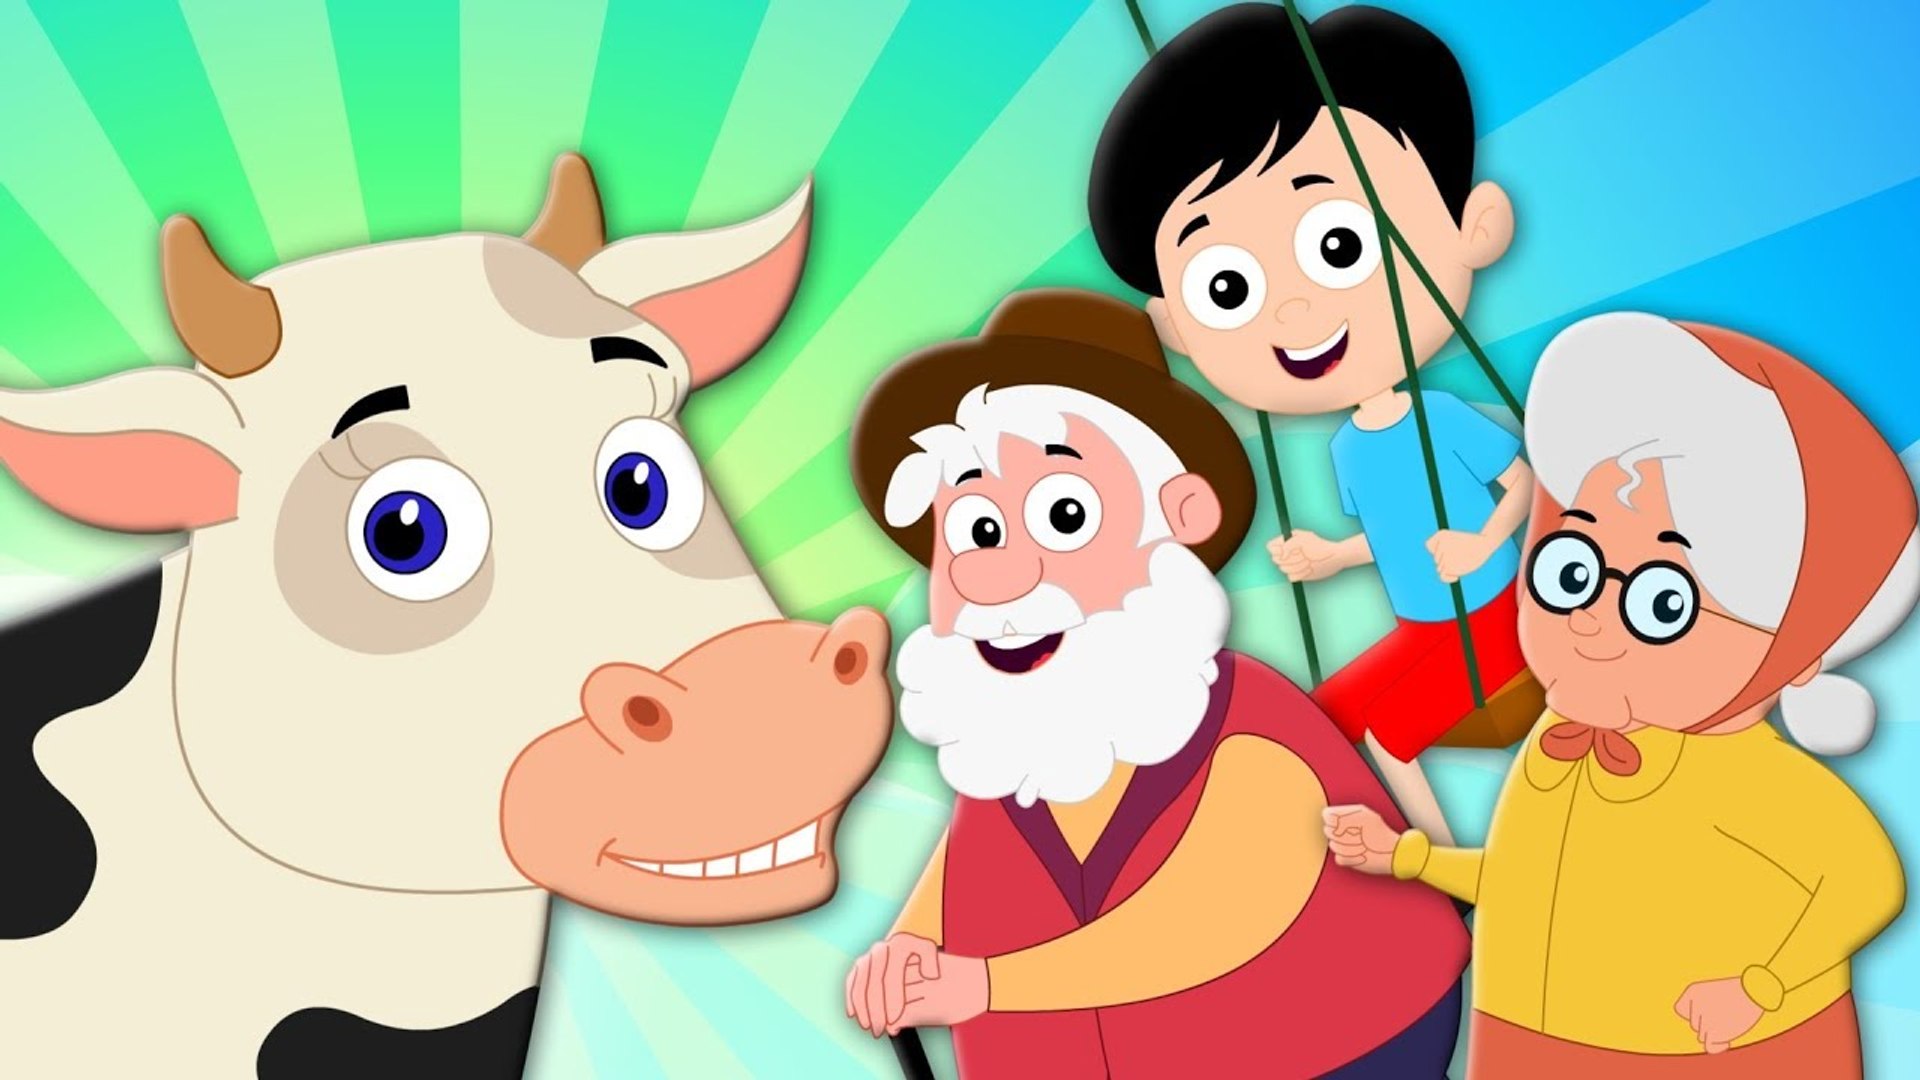 Moo Moo Cow  Kindergarten Songs And Videos For Children - video Dailymotion